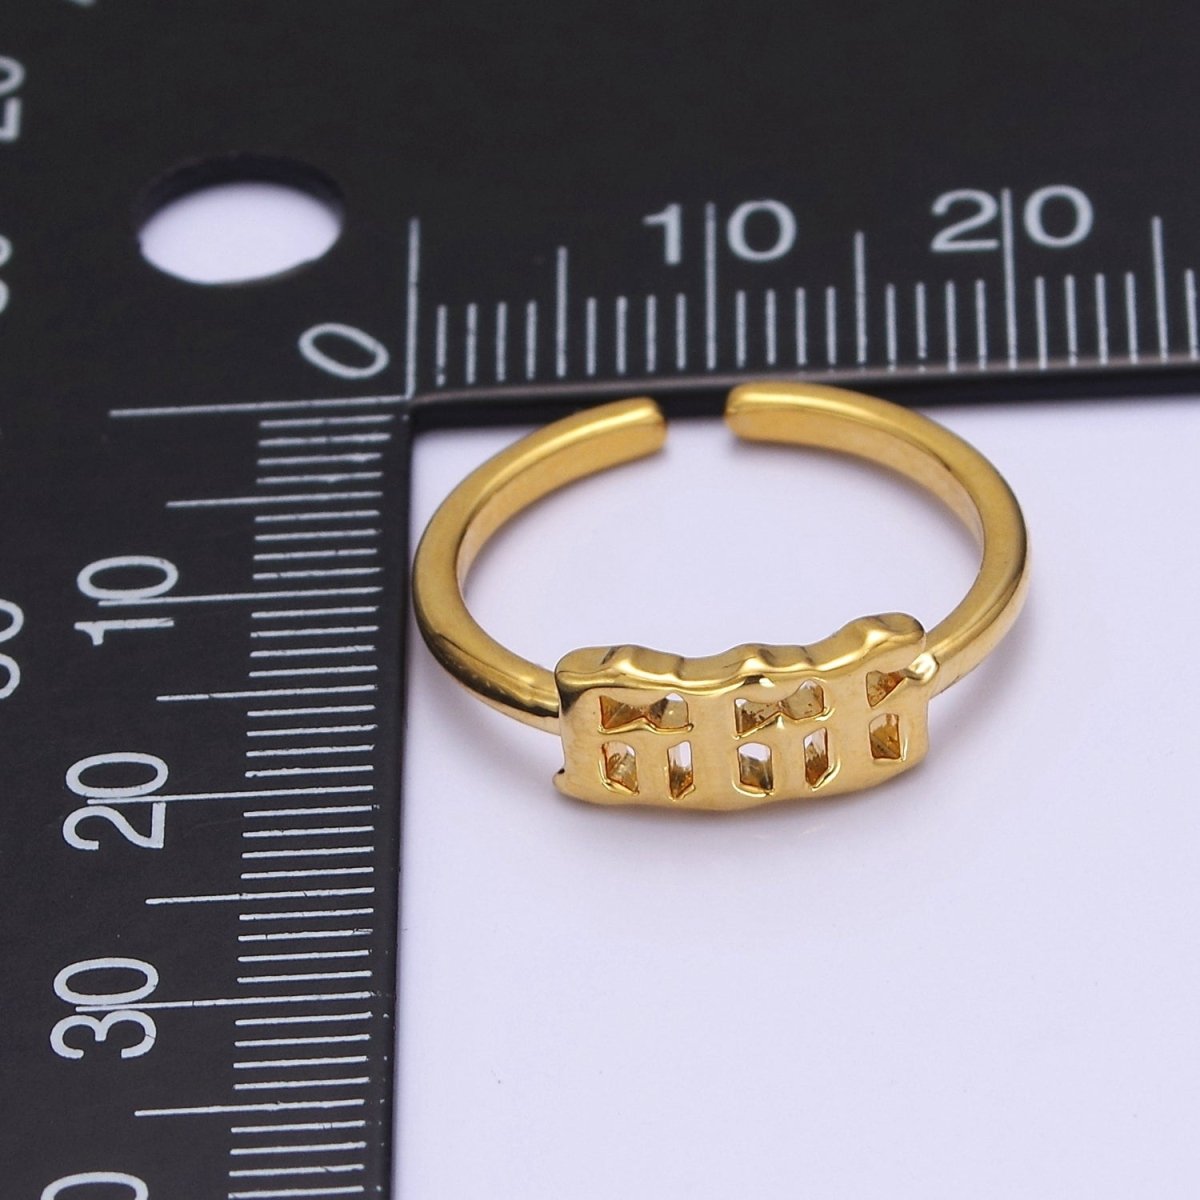 Dainty Angel Number Ring, Minimalist Gold Filled Ring Unisex Personalized Jewelry, Statement Rings O2056-O2064 - DLUXCA